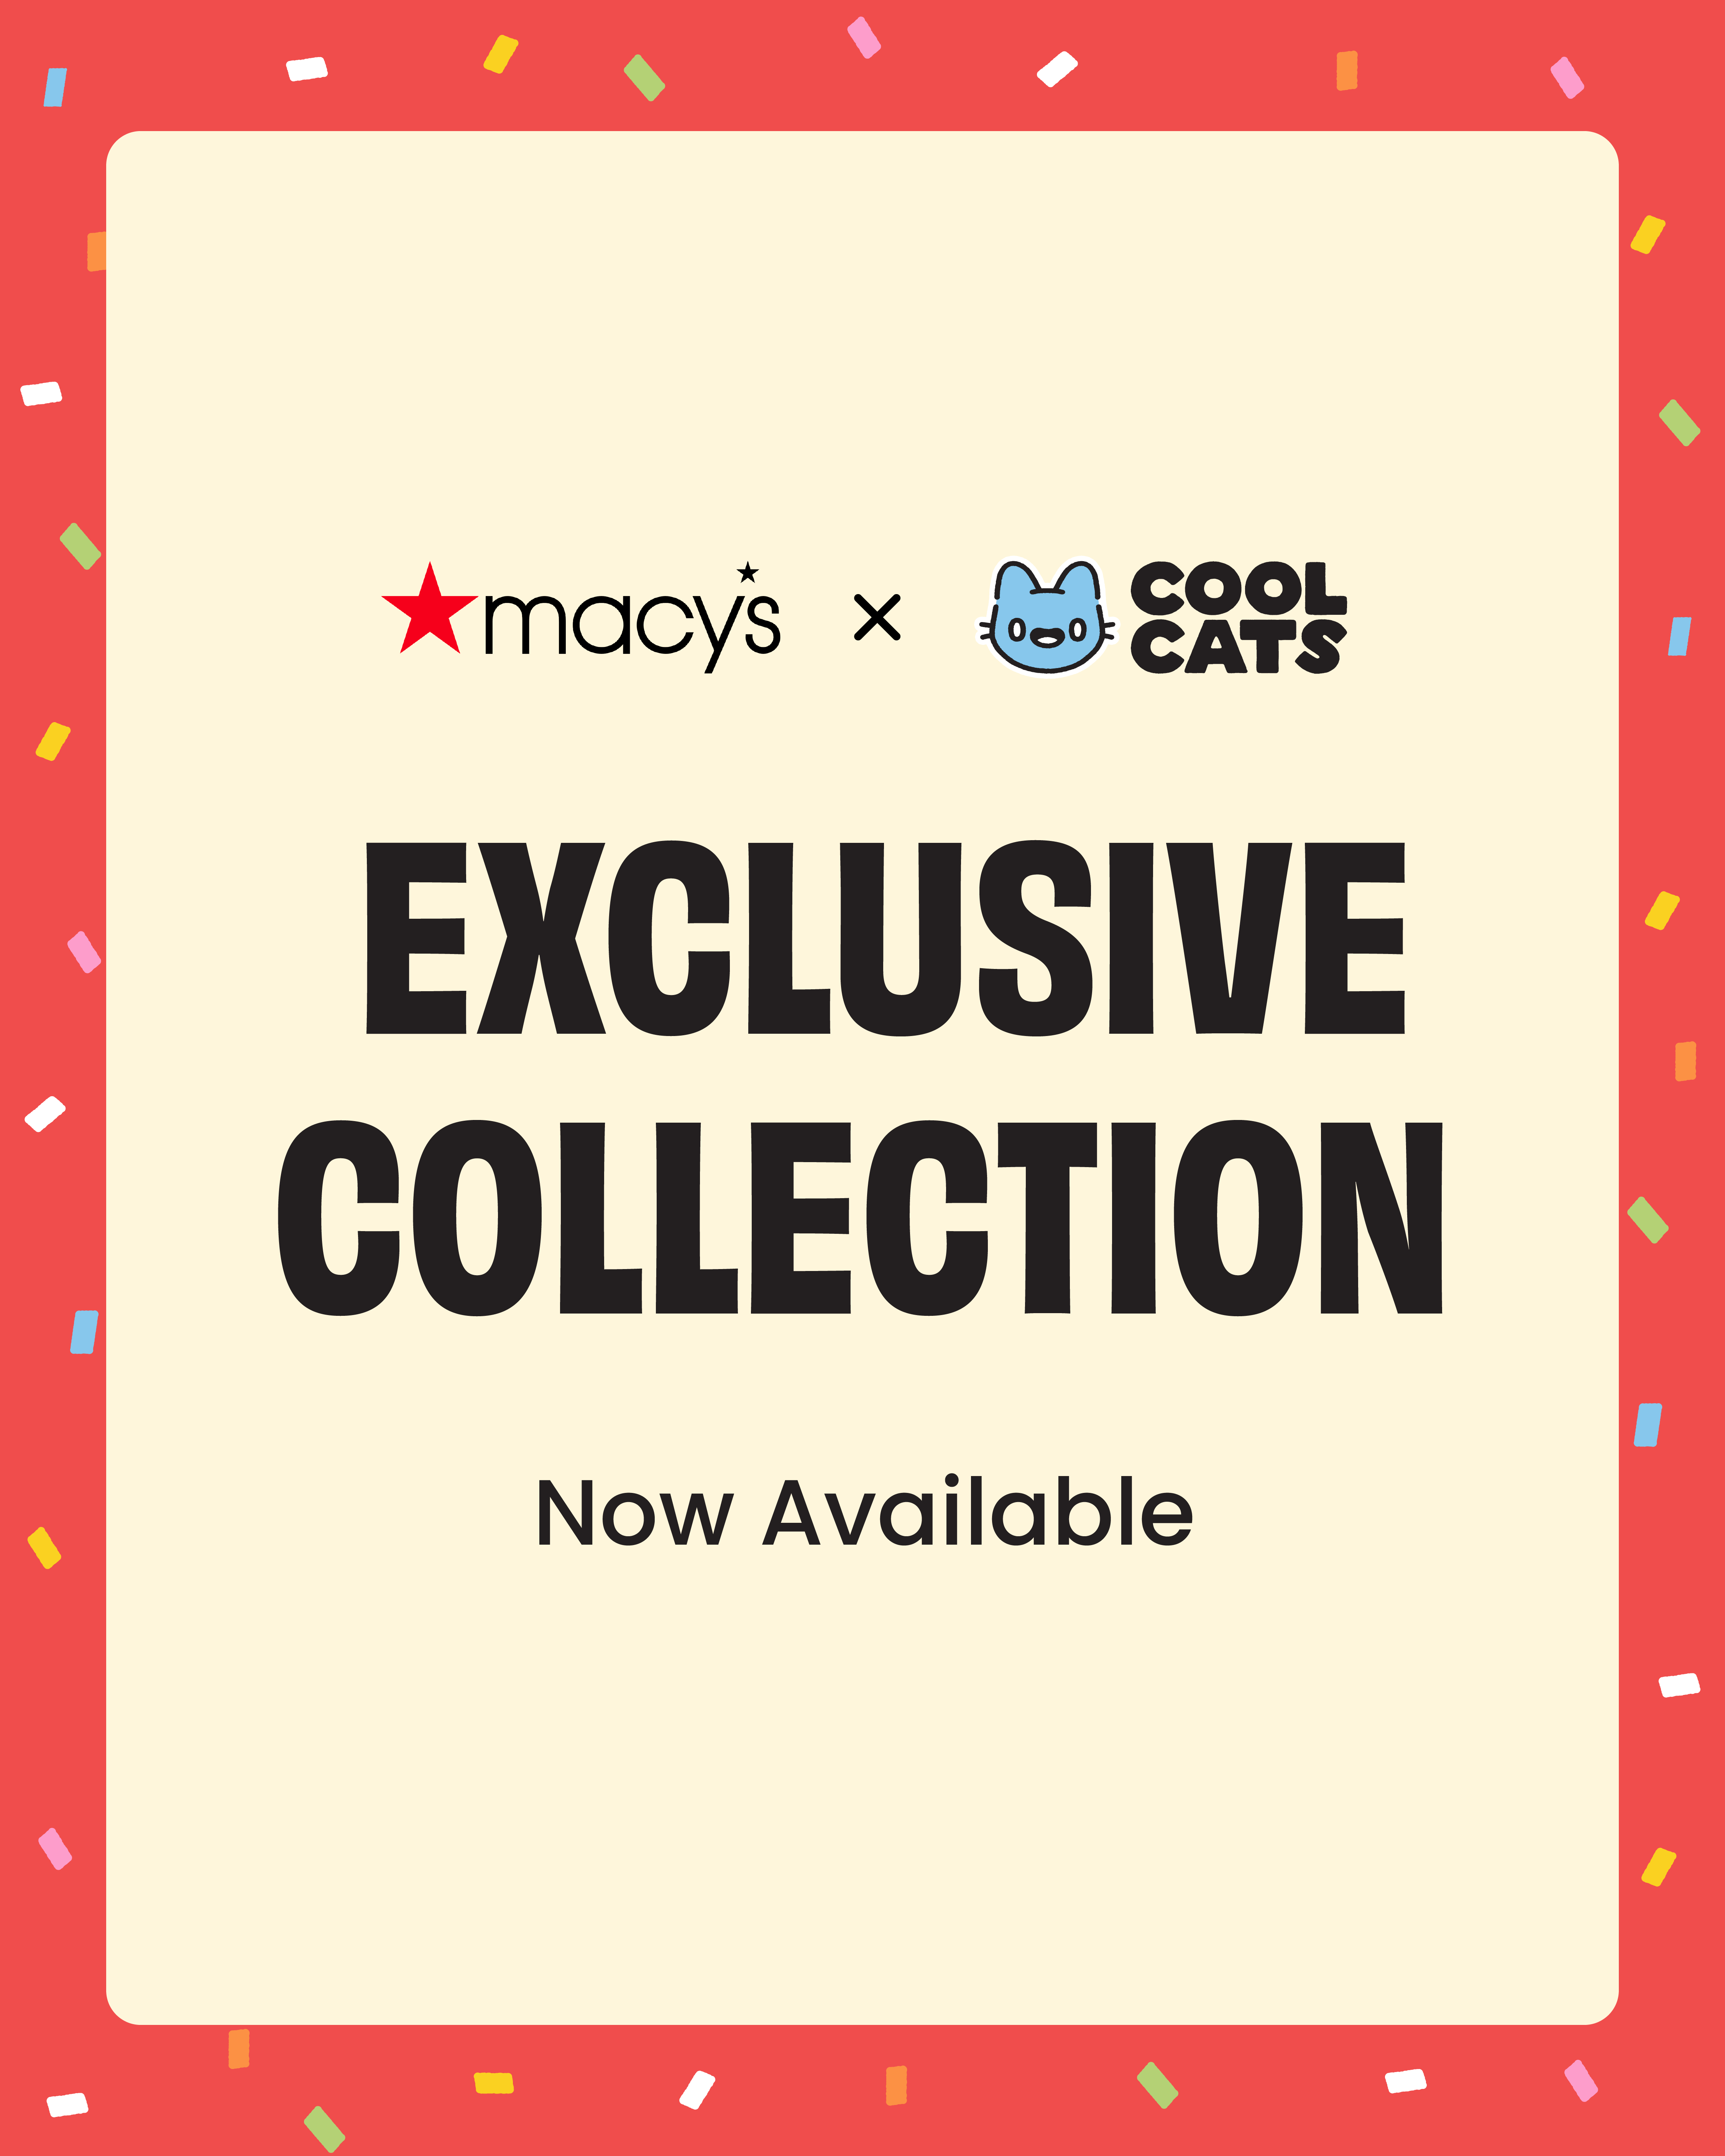 Cool Cats x Macy’s: Physical Collectibles with Digital Perks